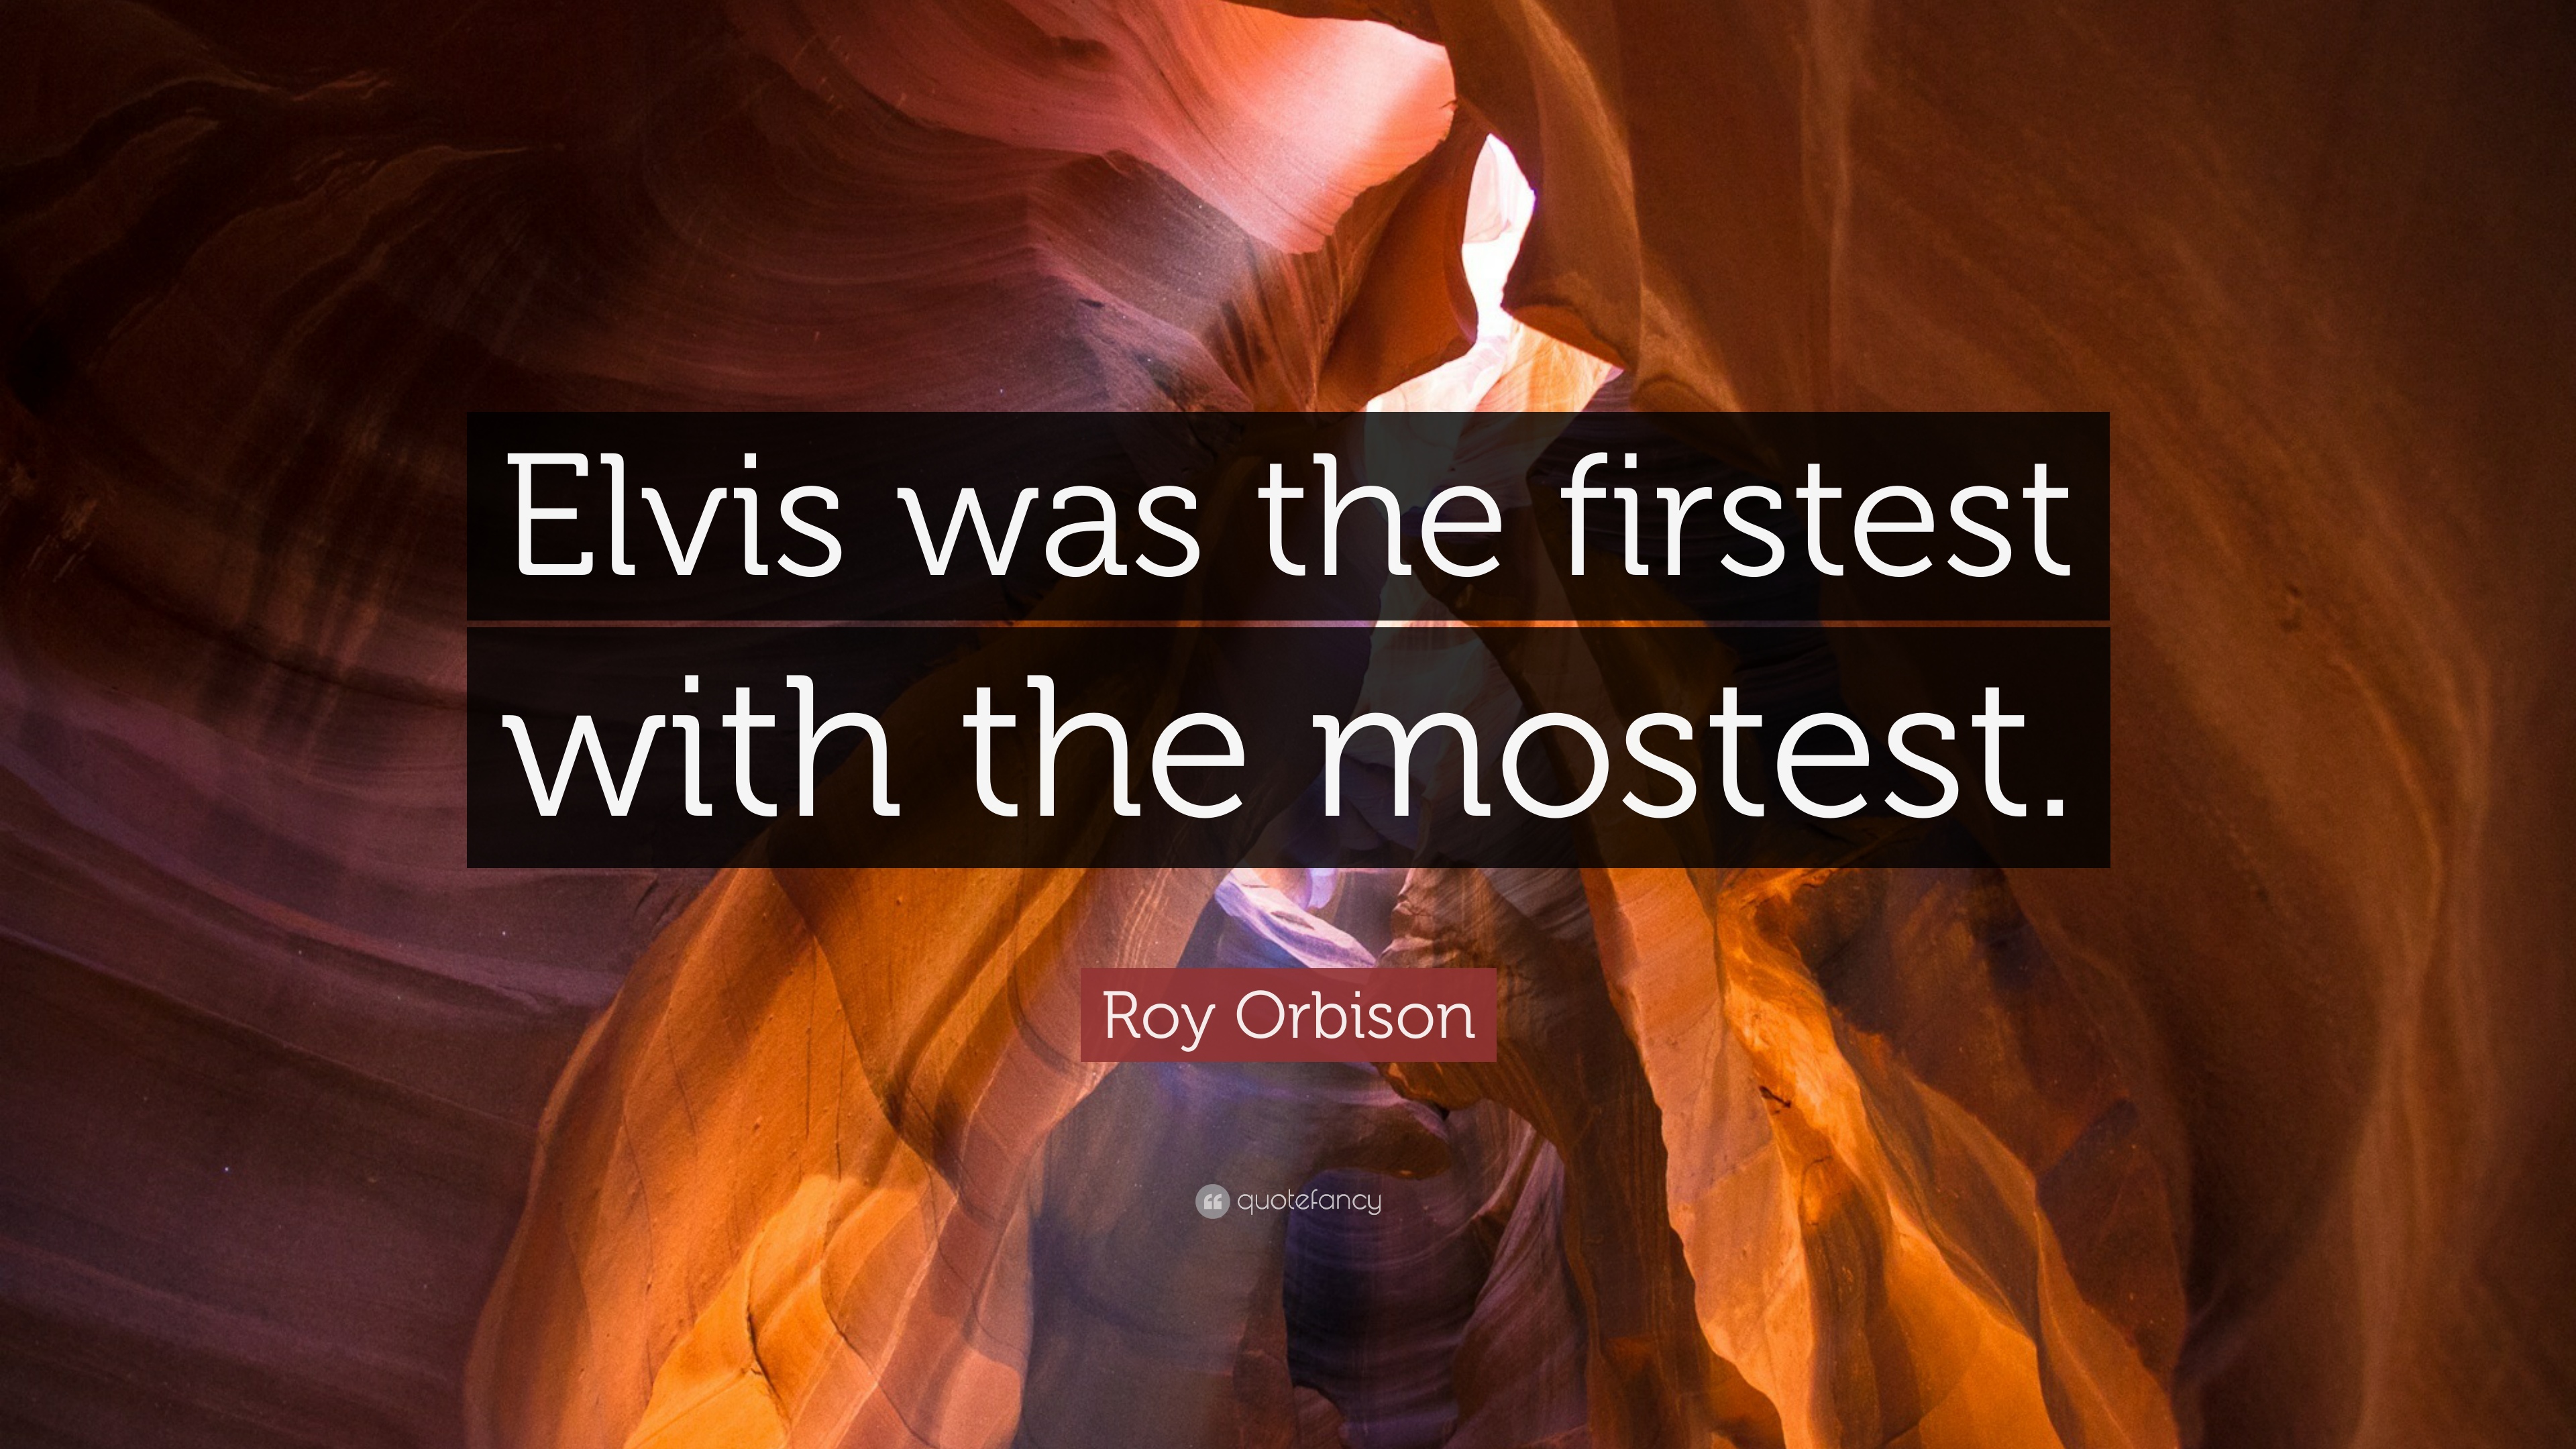 Roy Orbison Quote: “Elvis was the firstest with the mostest.” 7